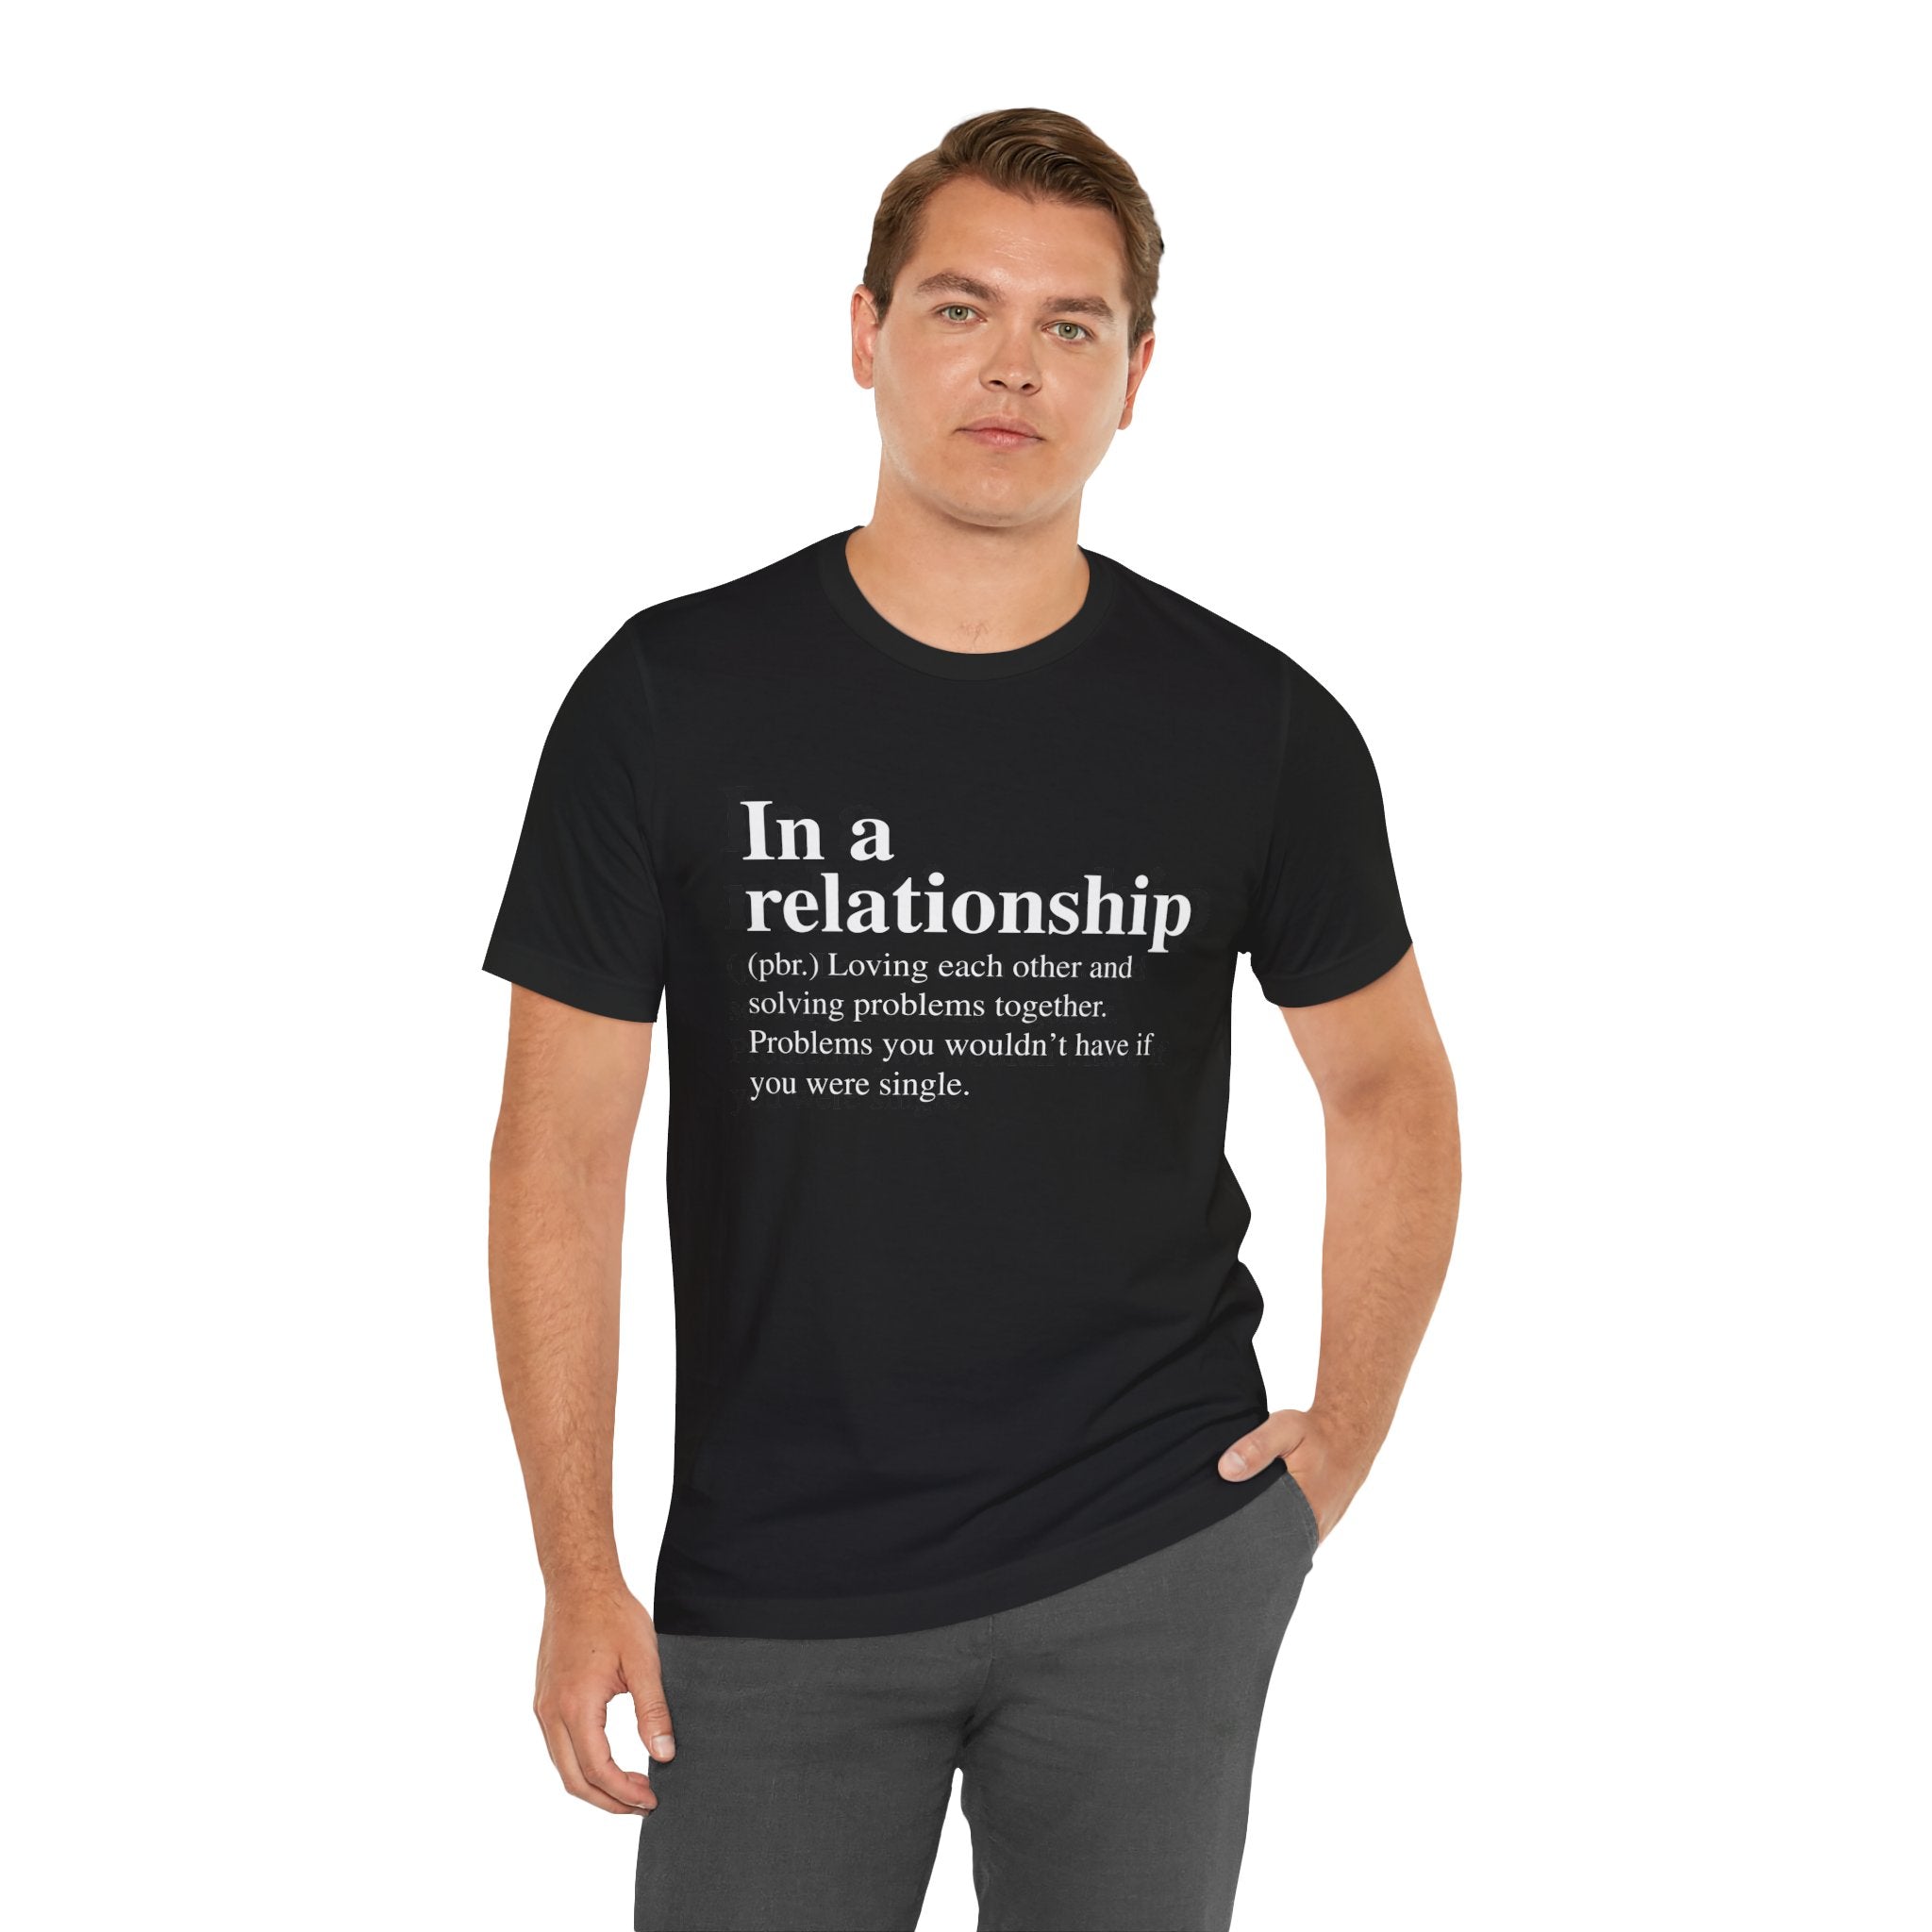 Man in the In a Relationship T-Shirt with text that reads, "solving problems together you wouldn't have if you were single.